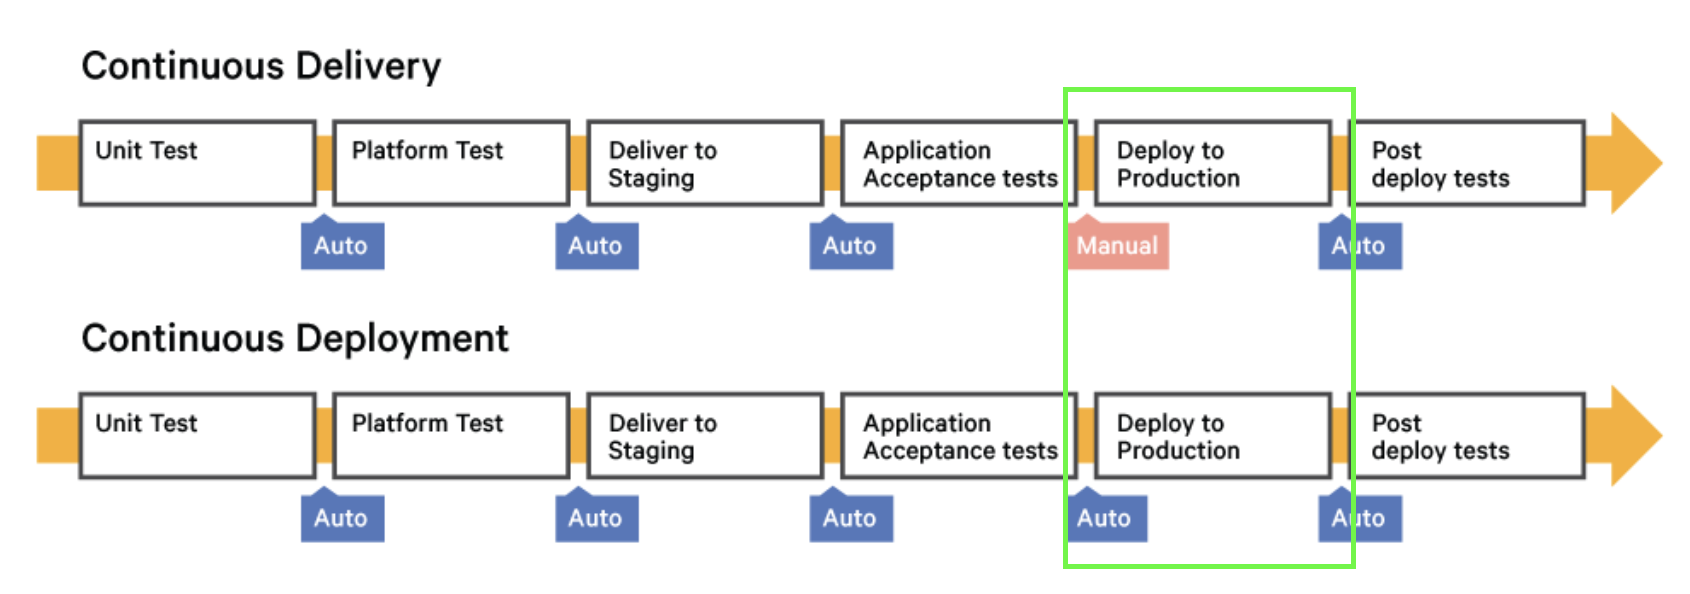 continuous-delivery-deployment.png